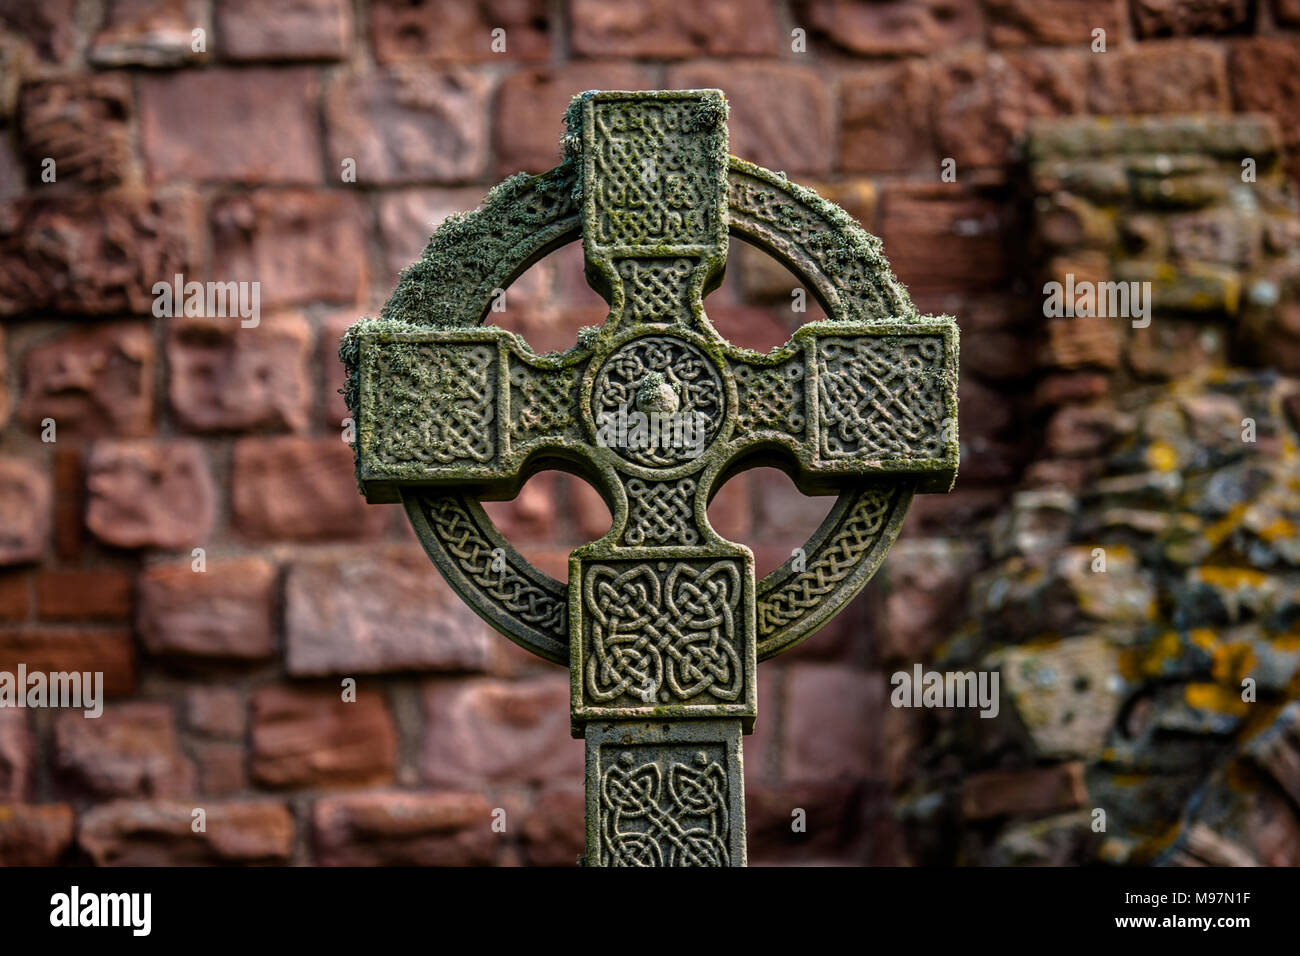 A high Celtic cross in a graveyard in the Glendalough Monastic site Stock Photo